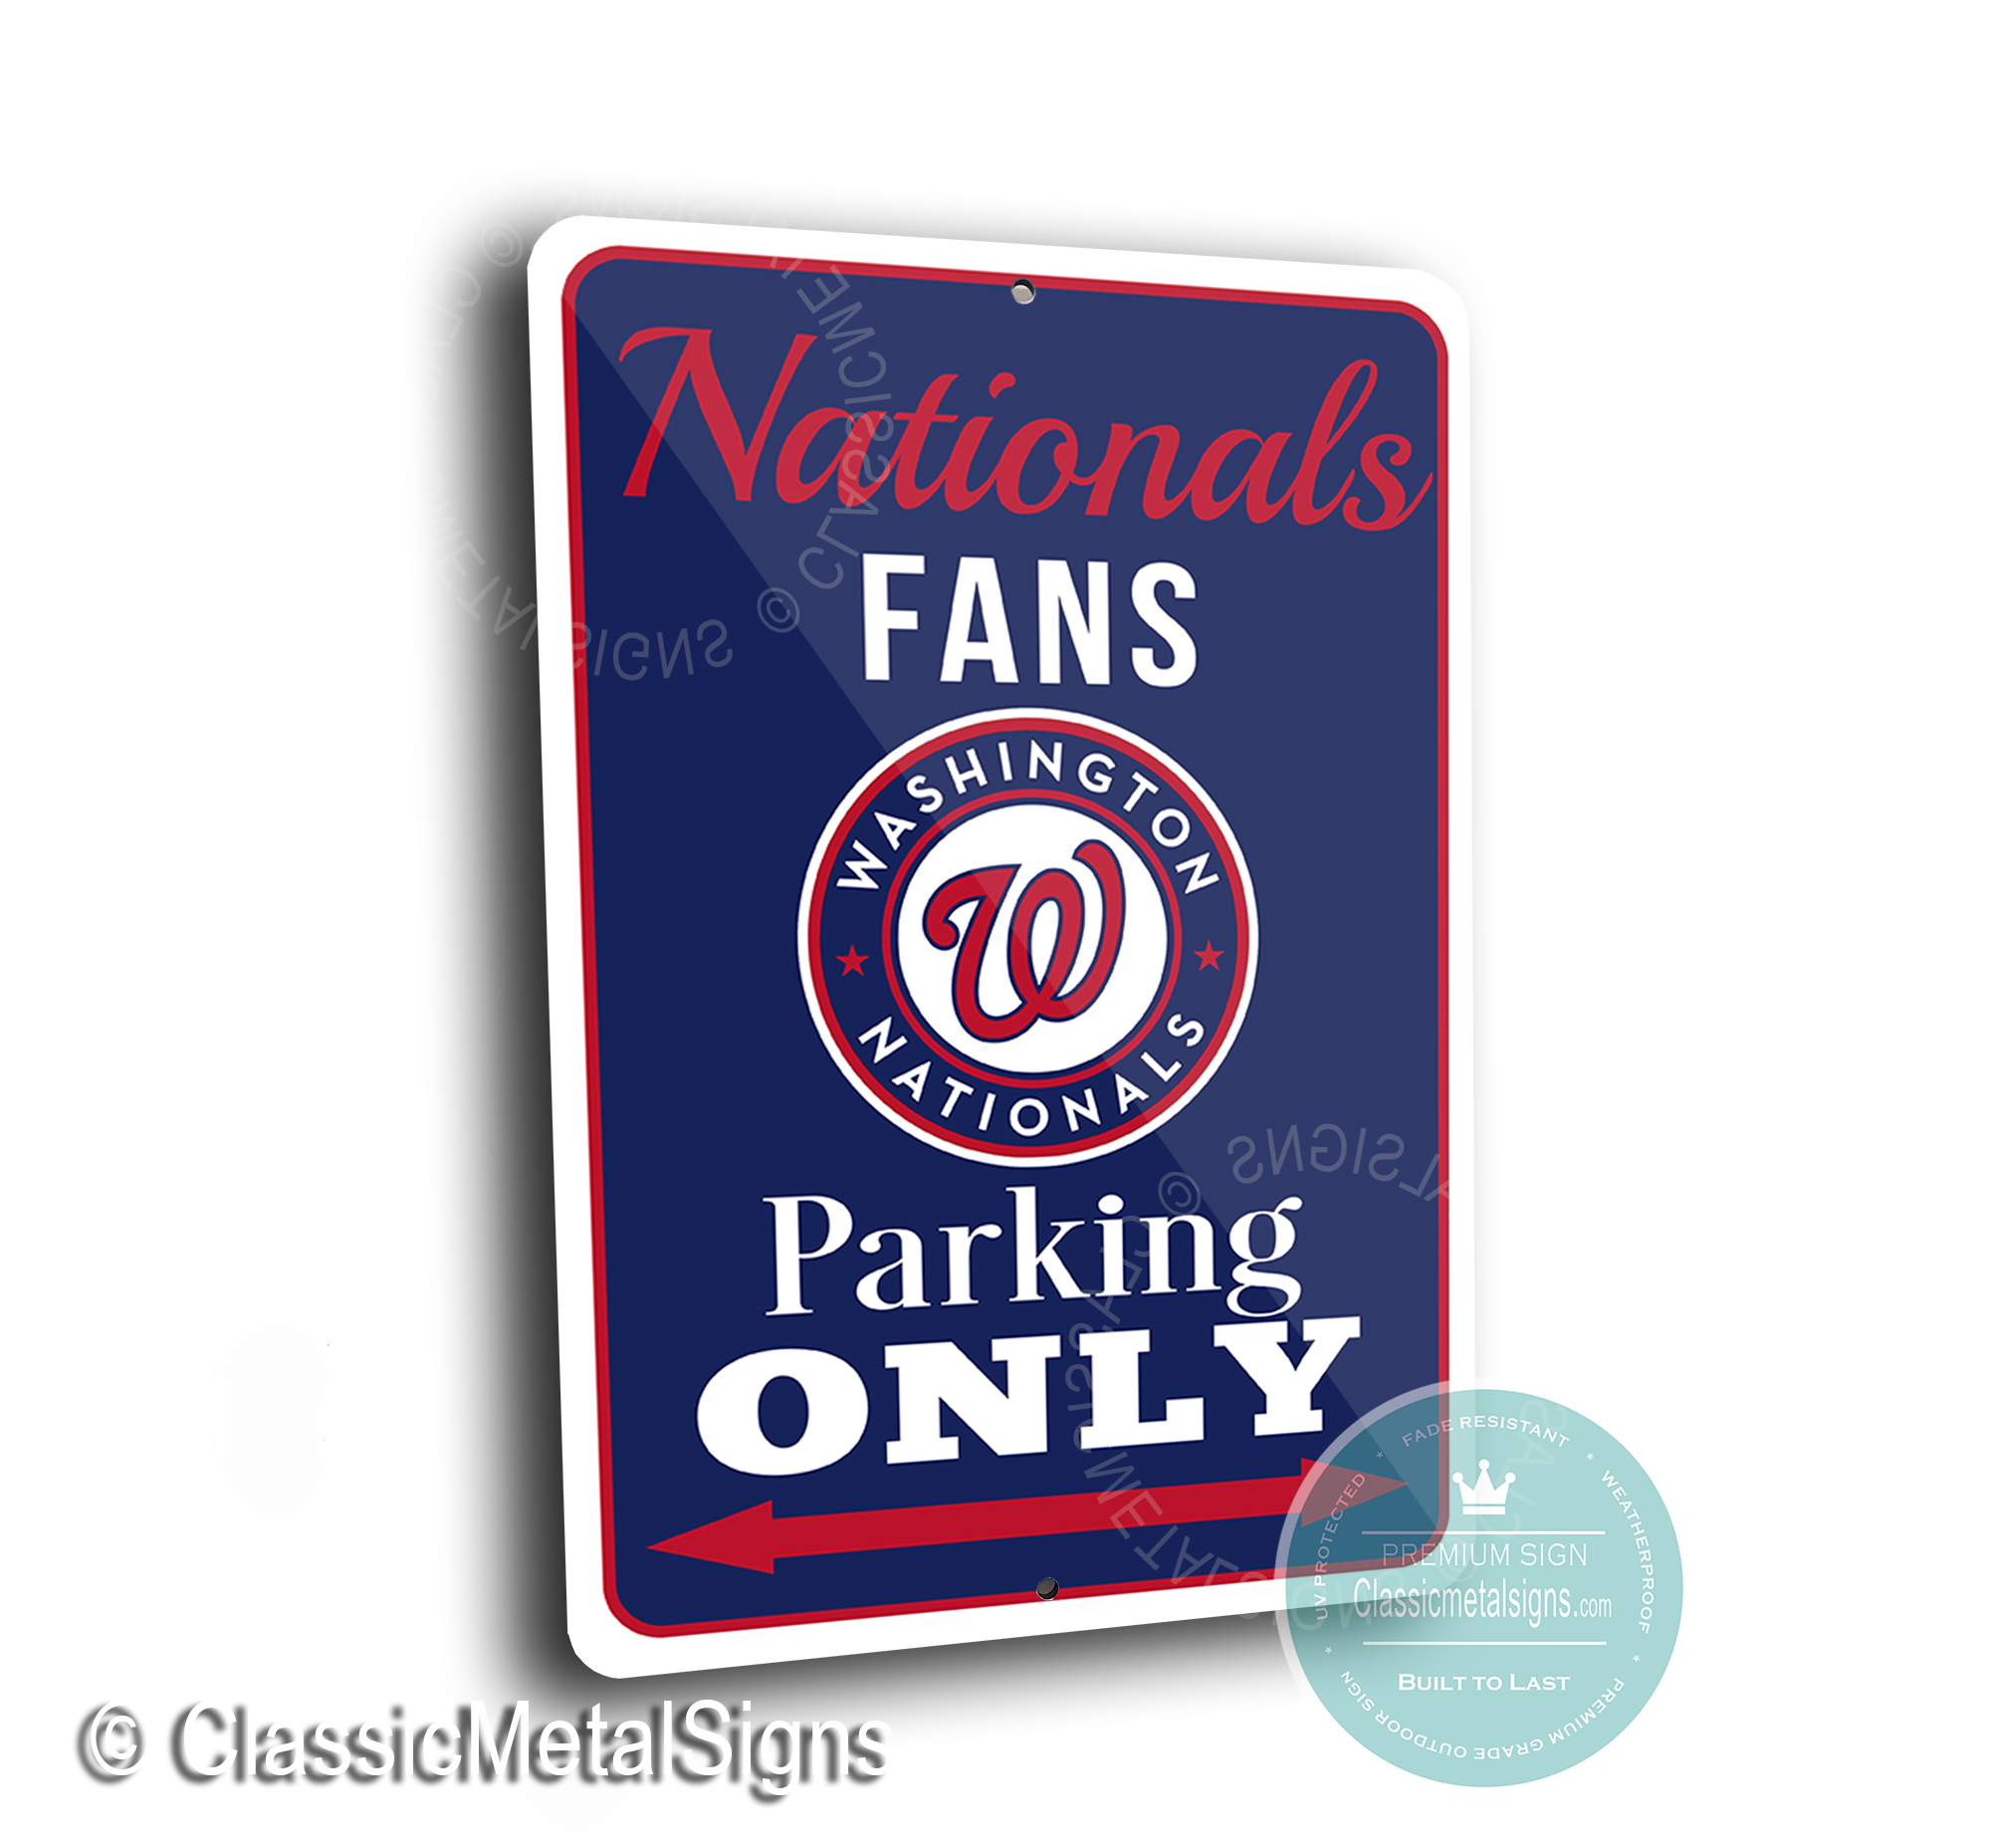 Nationals Parking Only signs